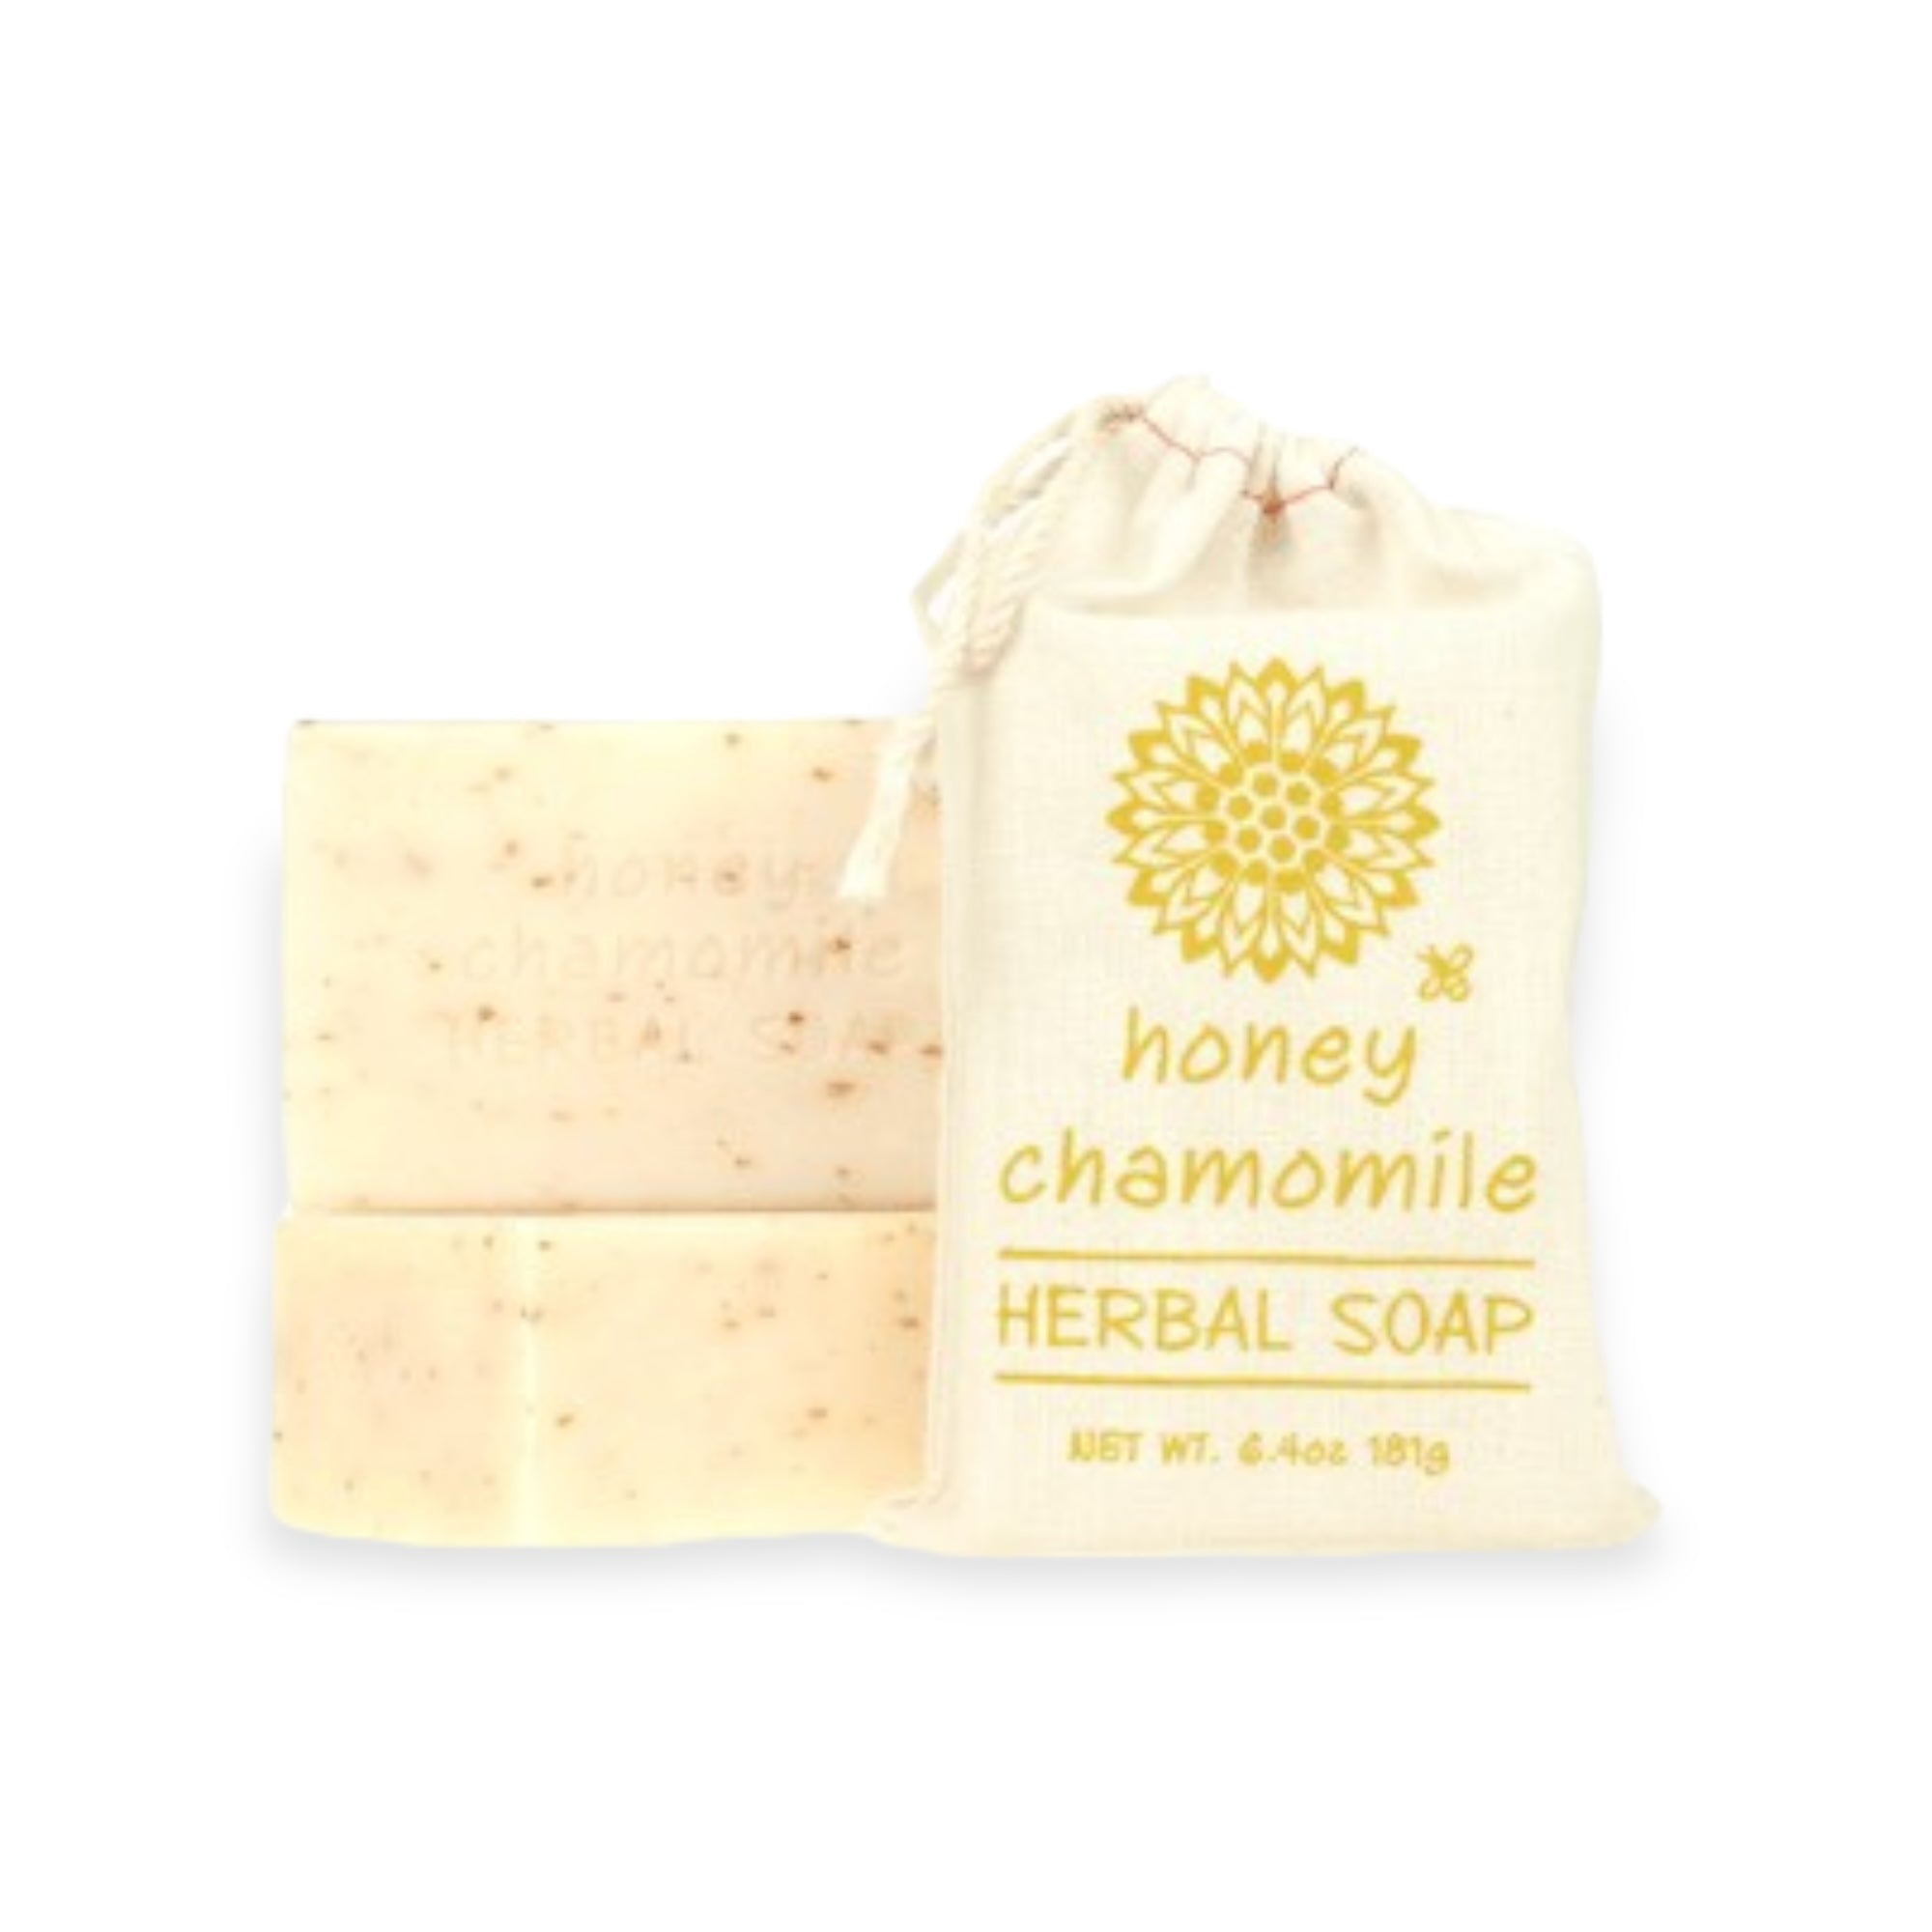 Honey Chamomile Herbal Soap by Greenwich Bay Trading Co.